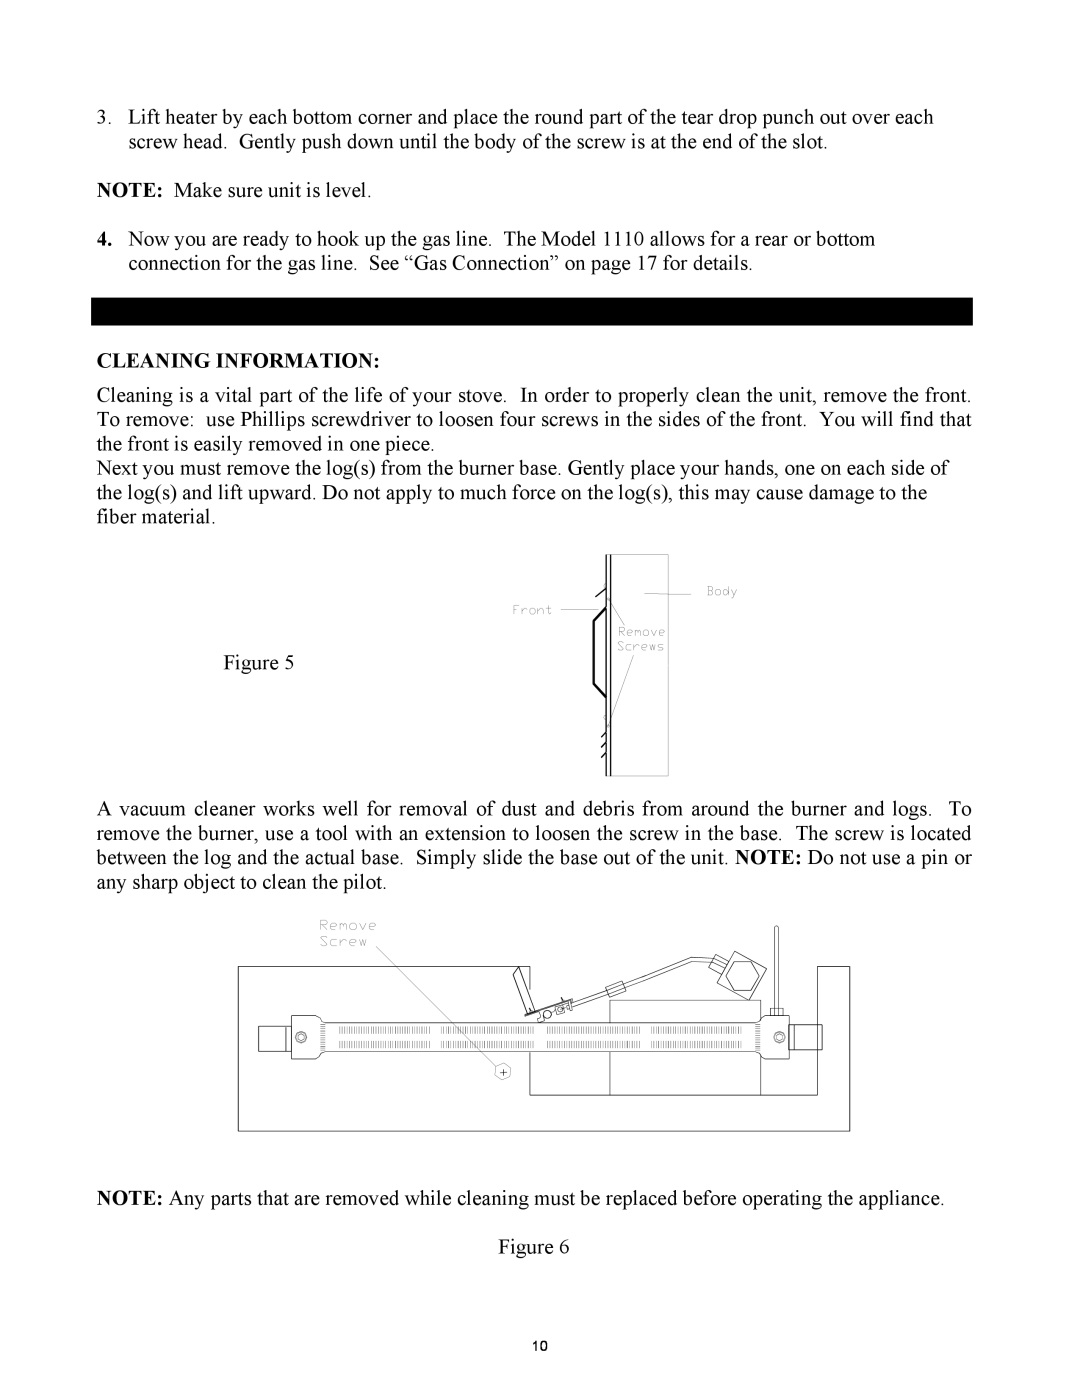 New Buck Corporation 1110 manual Cleaning Information 